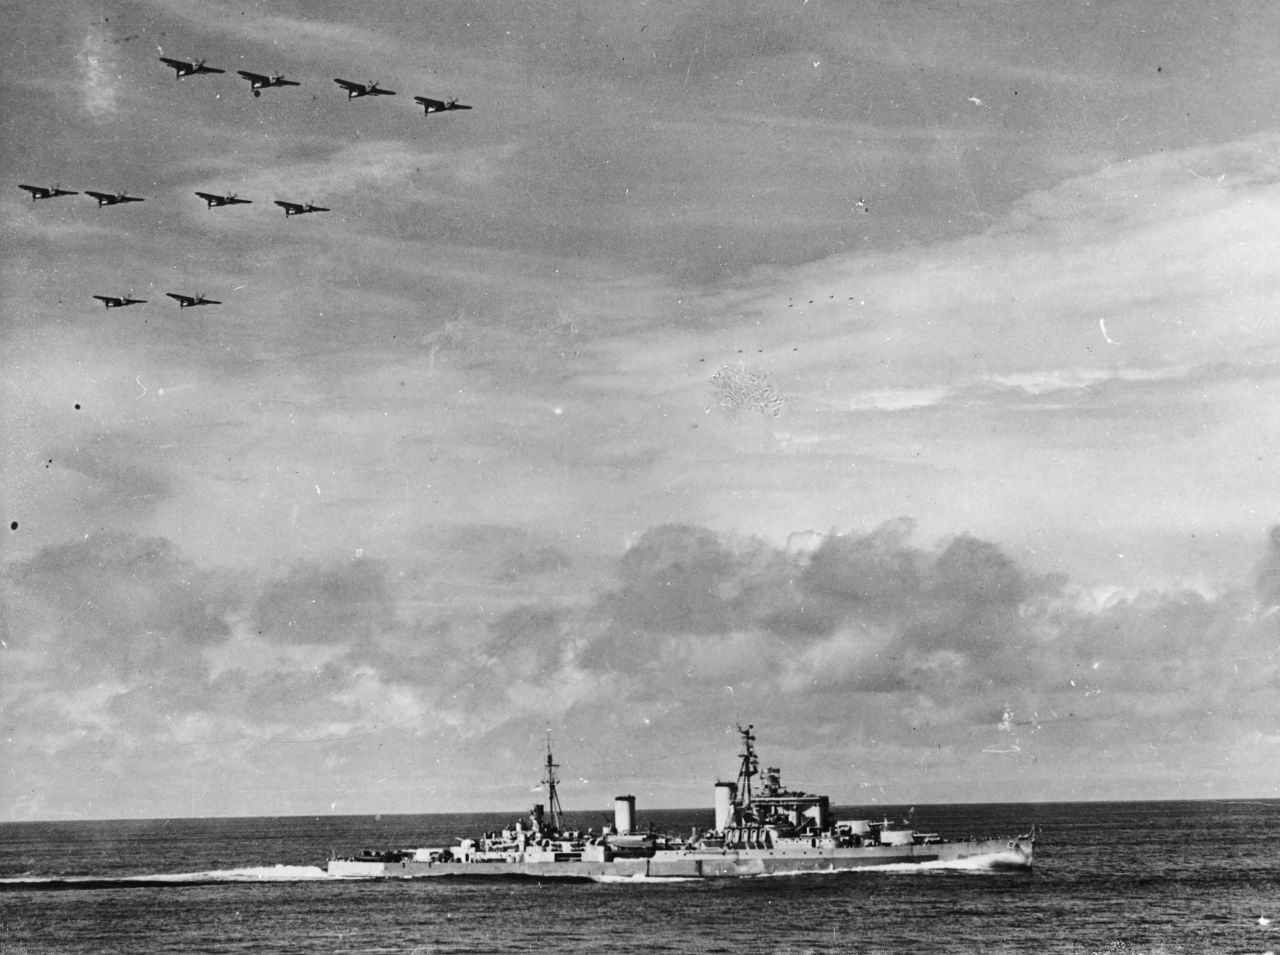 Barracuda aircraft fly in formation above the HMS Swiftsure as the British Royal Navy battleship heads to Hong Kong to accept surrender from the Japanese in 1945.